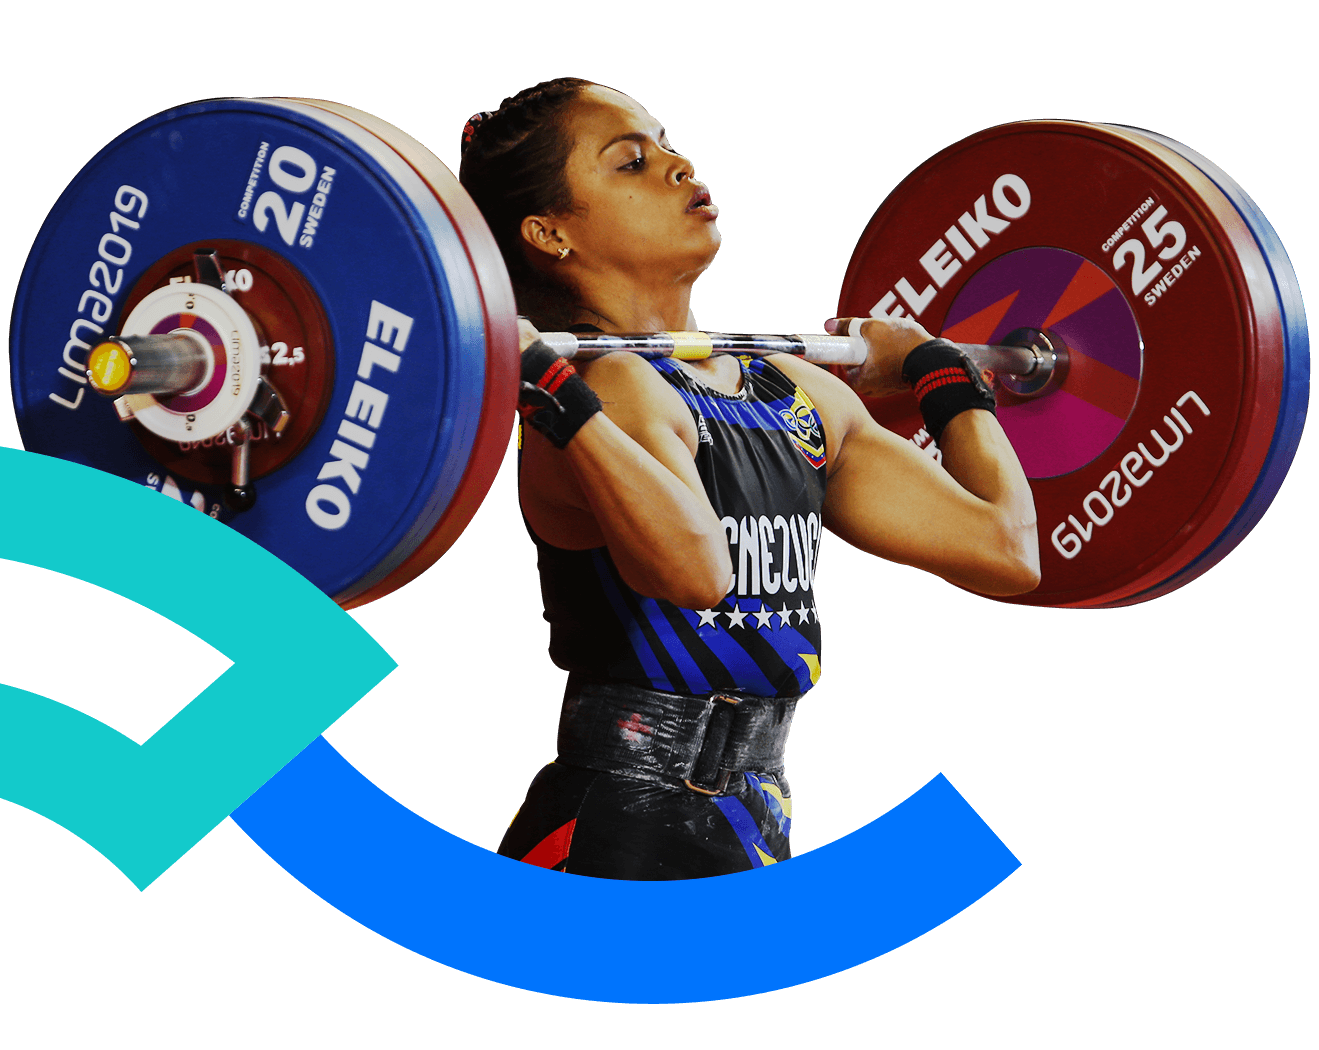 In the picture, a female weightlifter is holding a bar above her shoulders.